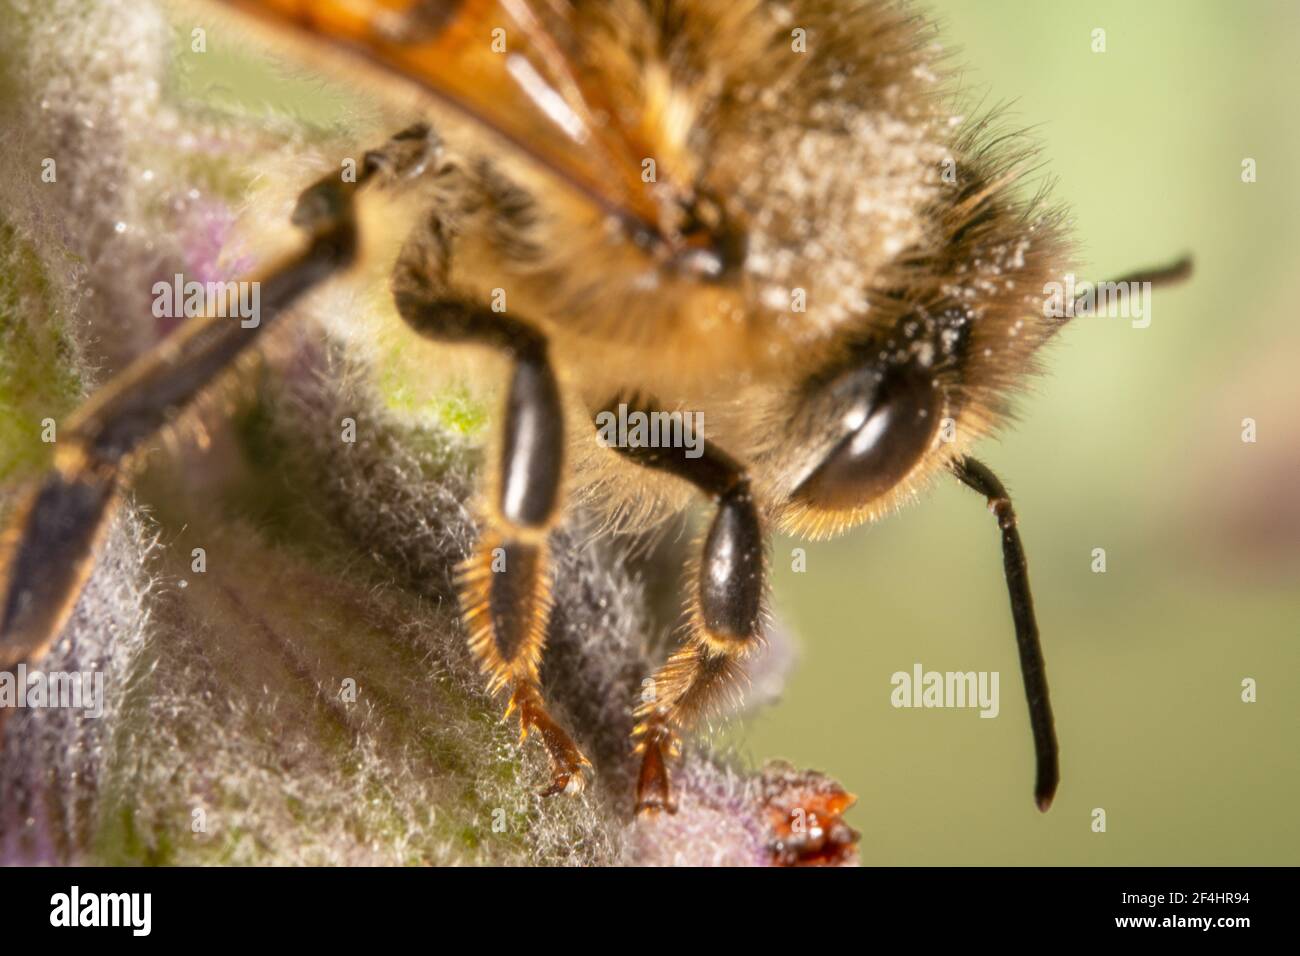 Close up shot of a furry honey bee with orange legs Stock Photo